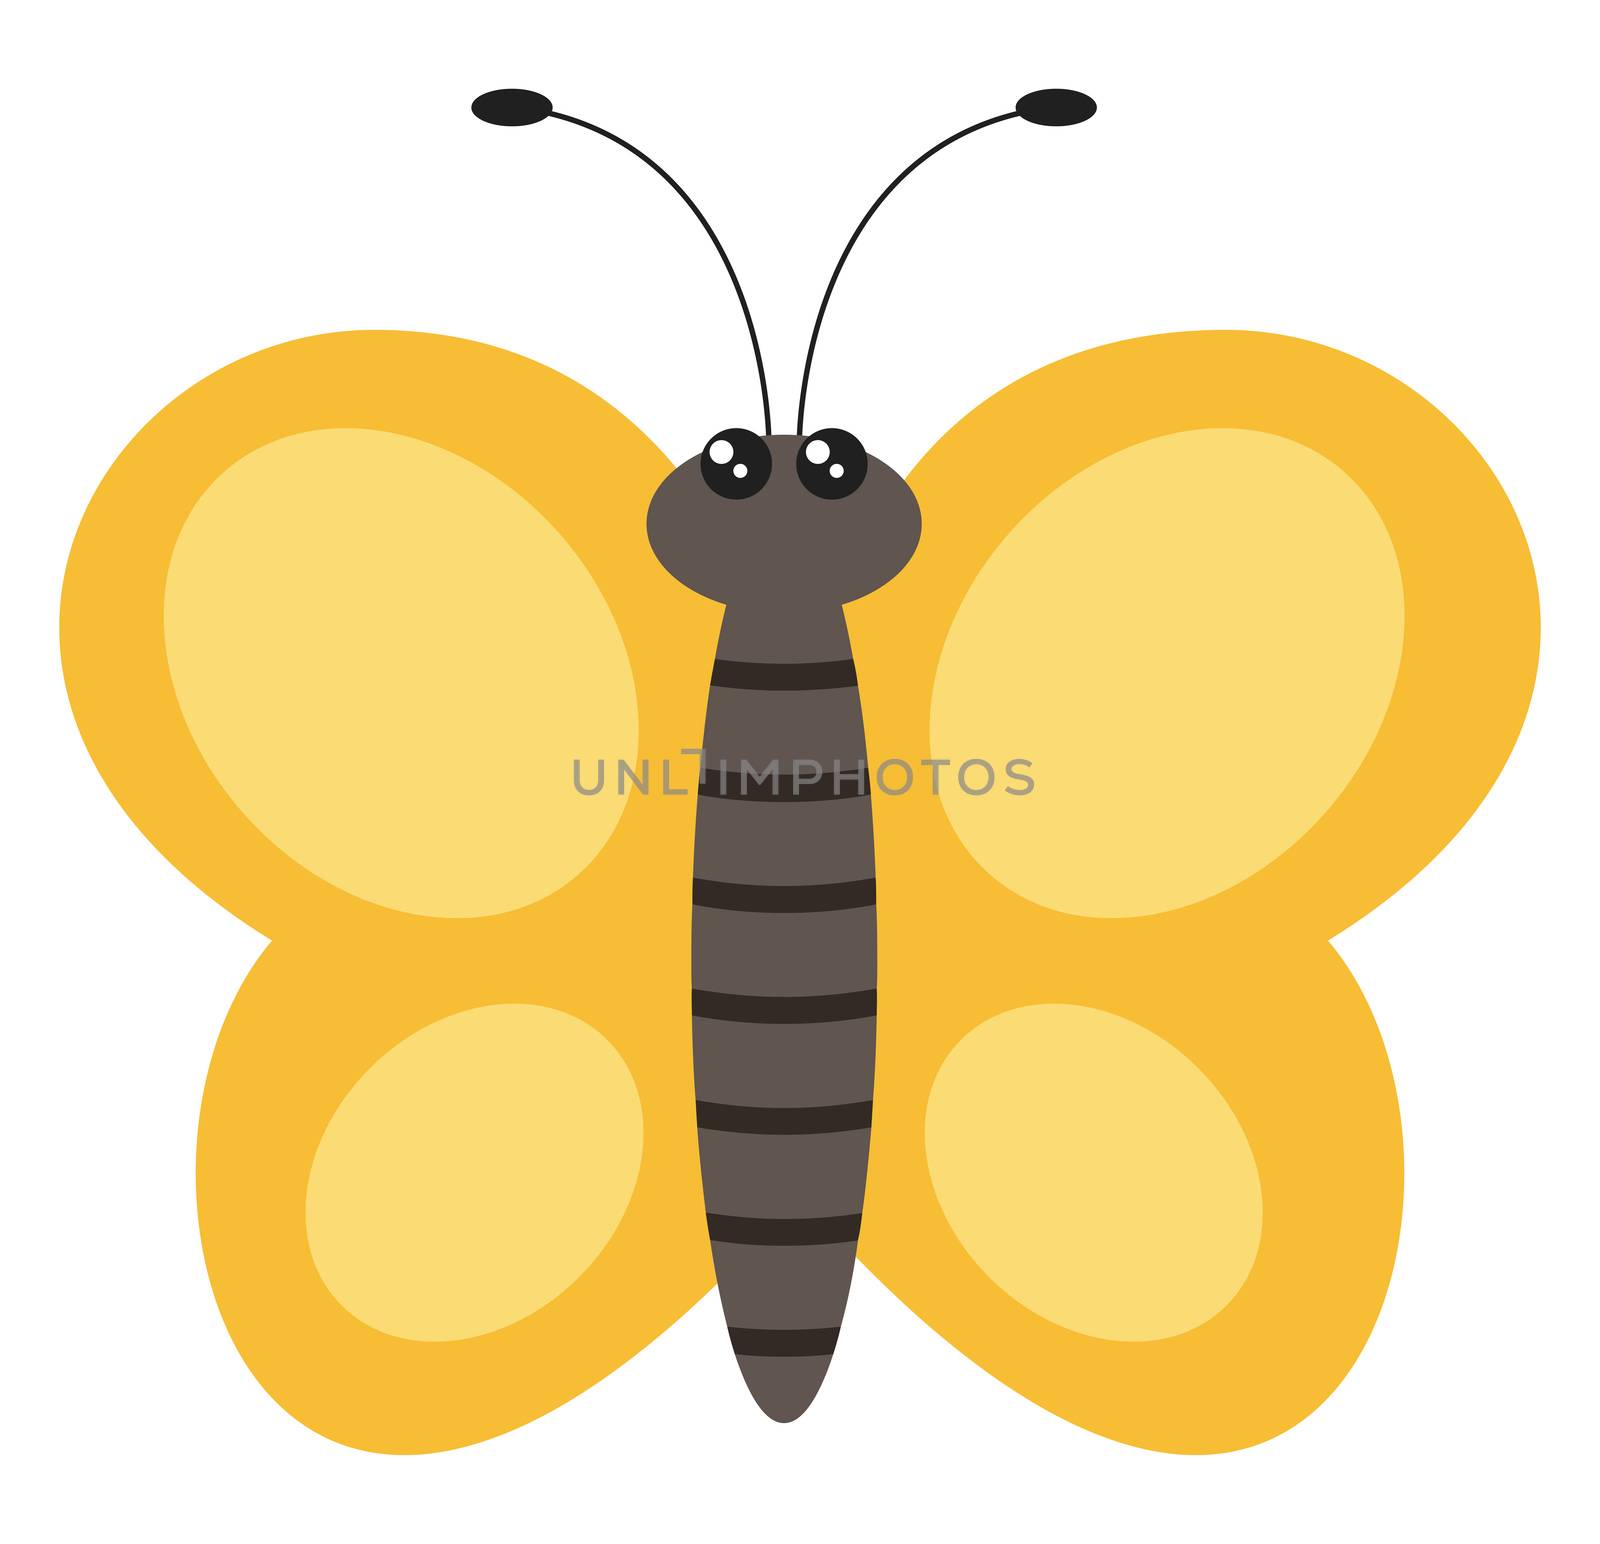 Yellow butterfly, illustration, vector on white background